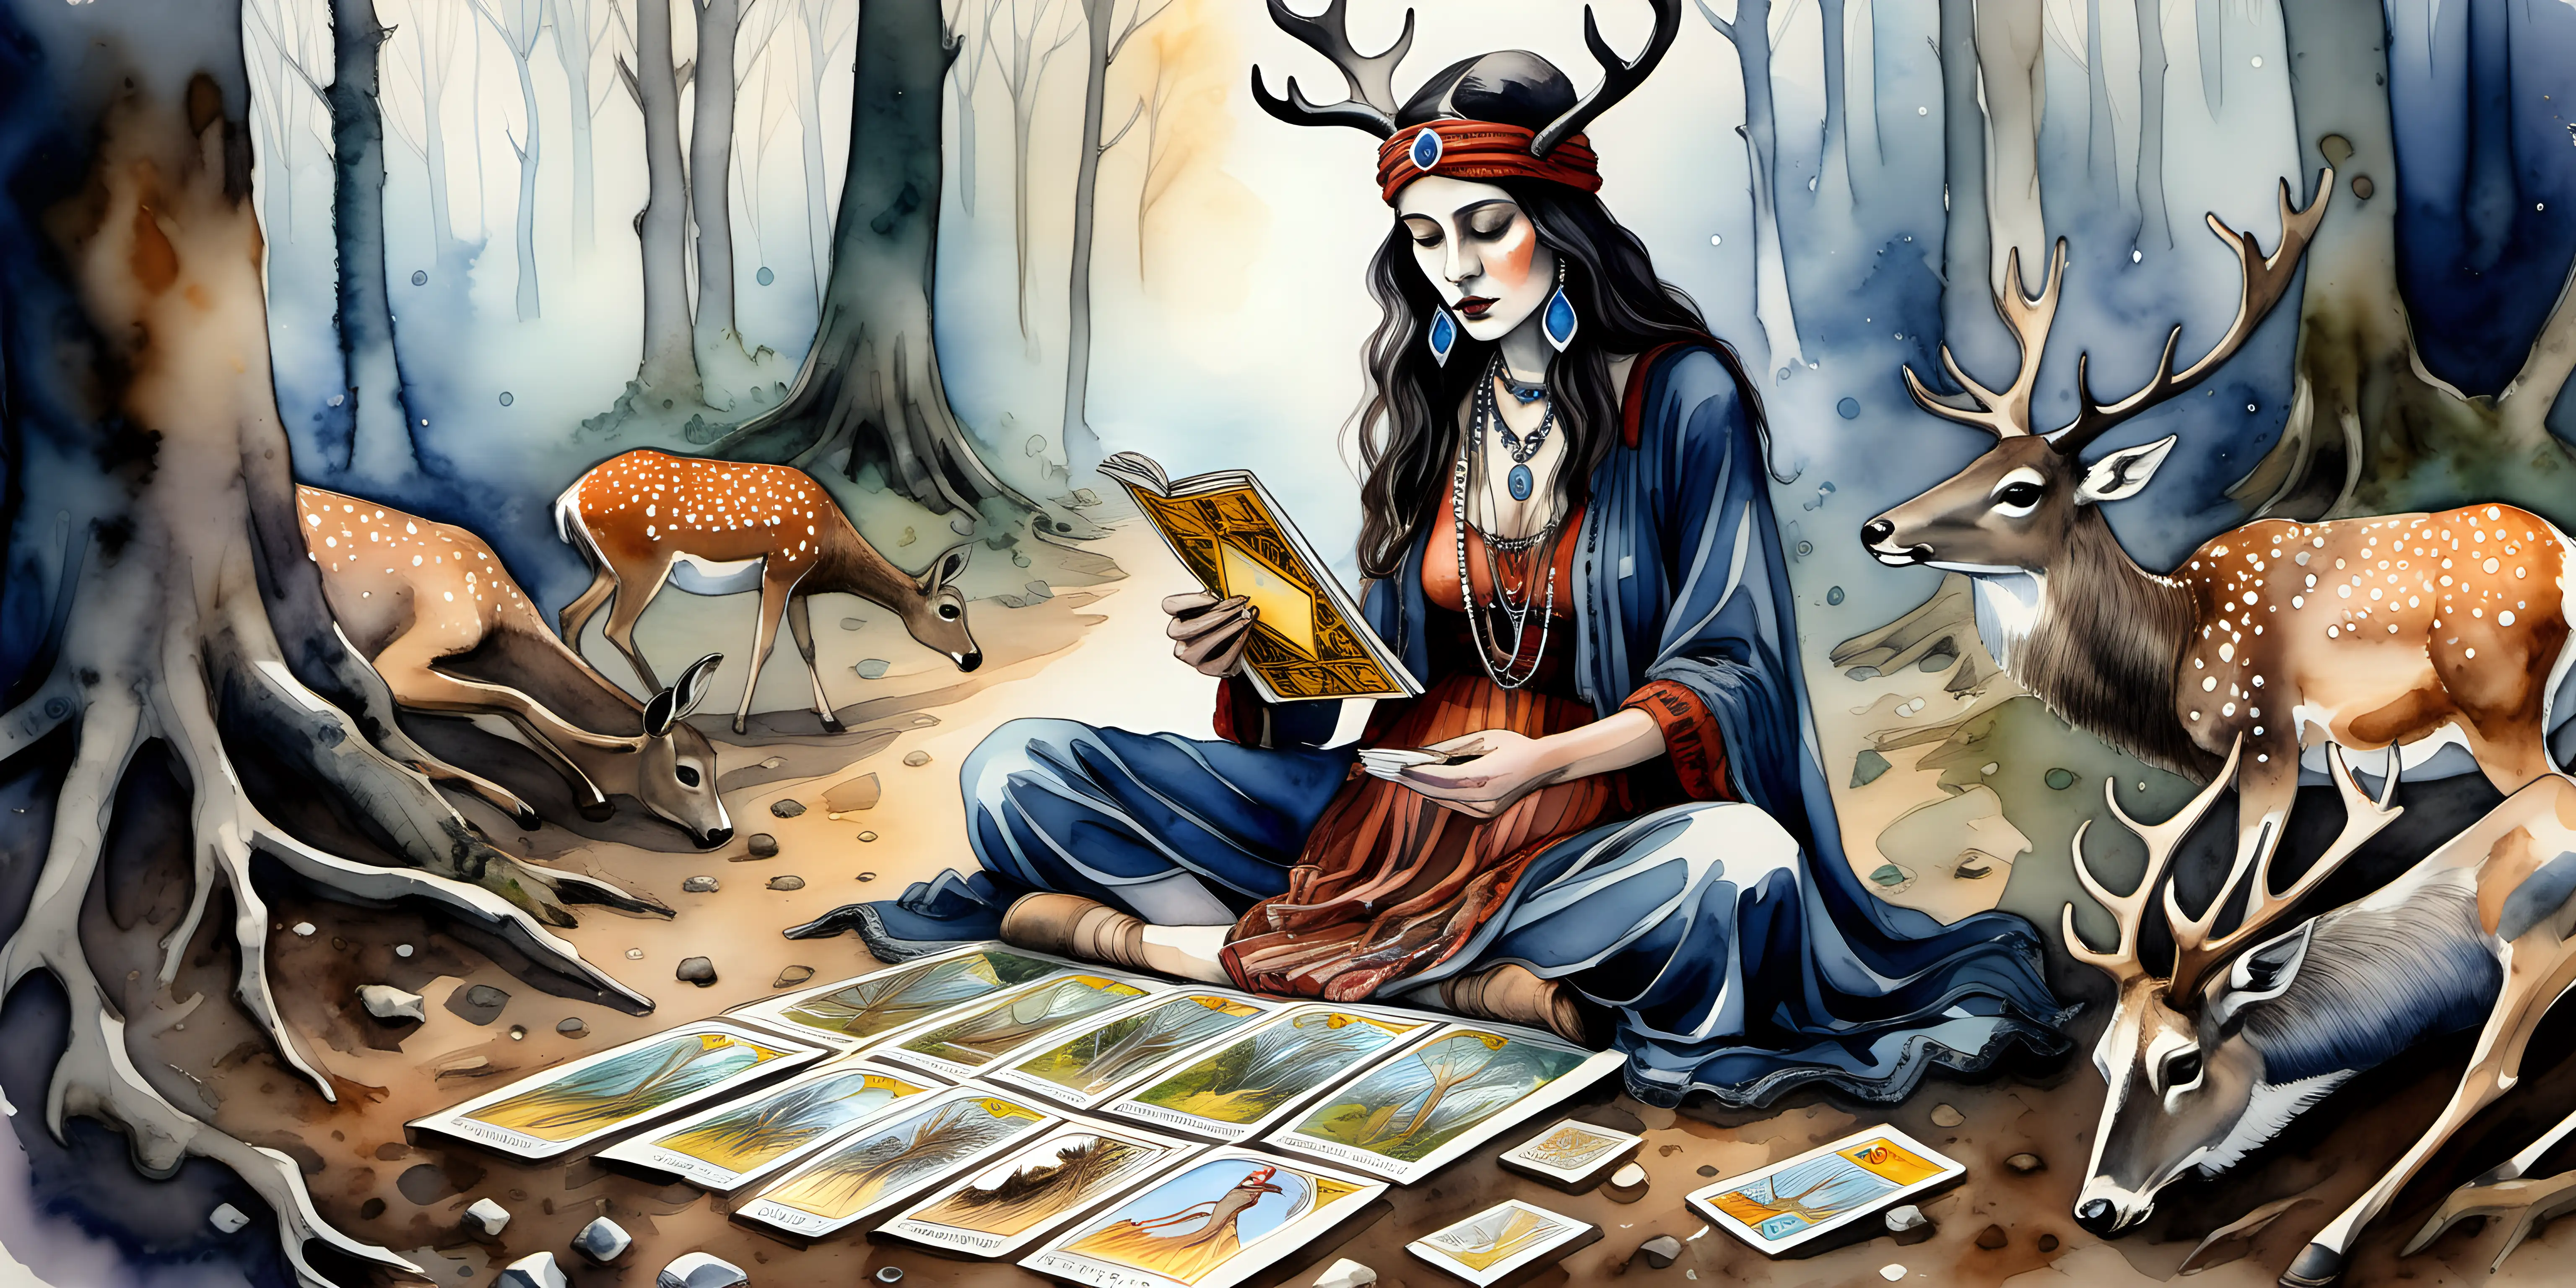 Enchanting Watercolor Art Gypsy Reading Ancient Tarot Cards in Mystical Forest